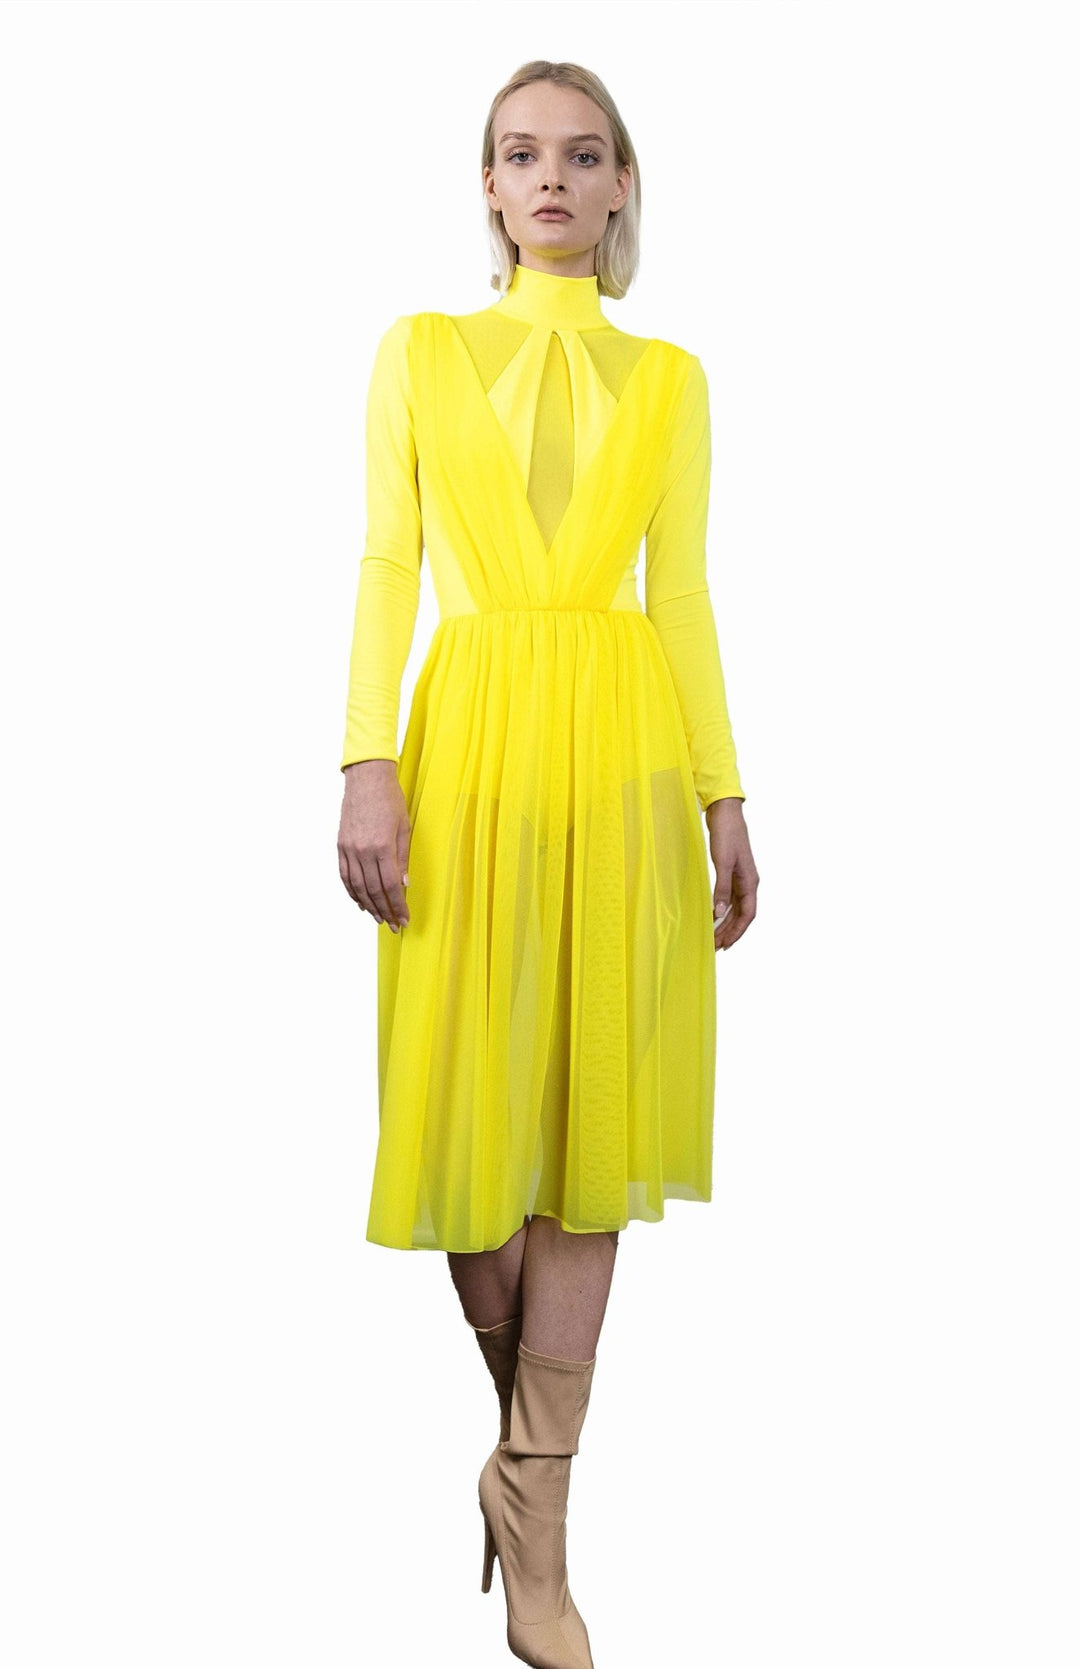 Dramatic, Neon yellow, ballerina style, bodysuit dress, with long sleeves, turtleneck and gathered sheer skirt below the knee.